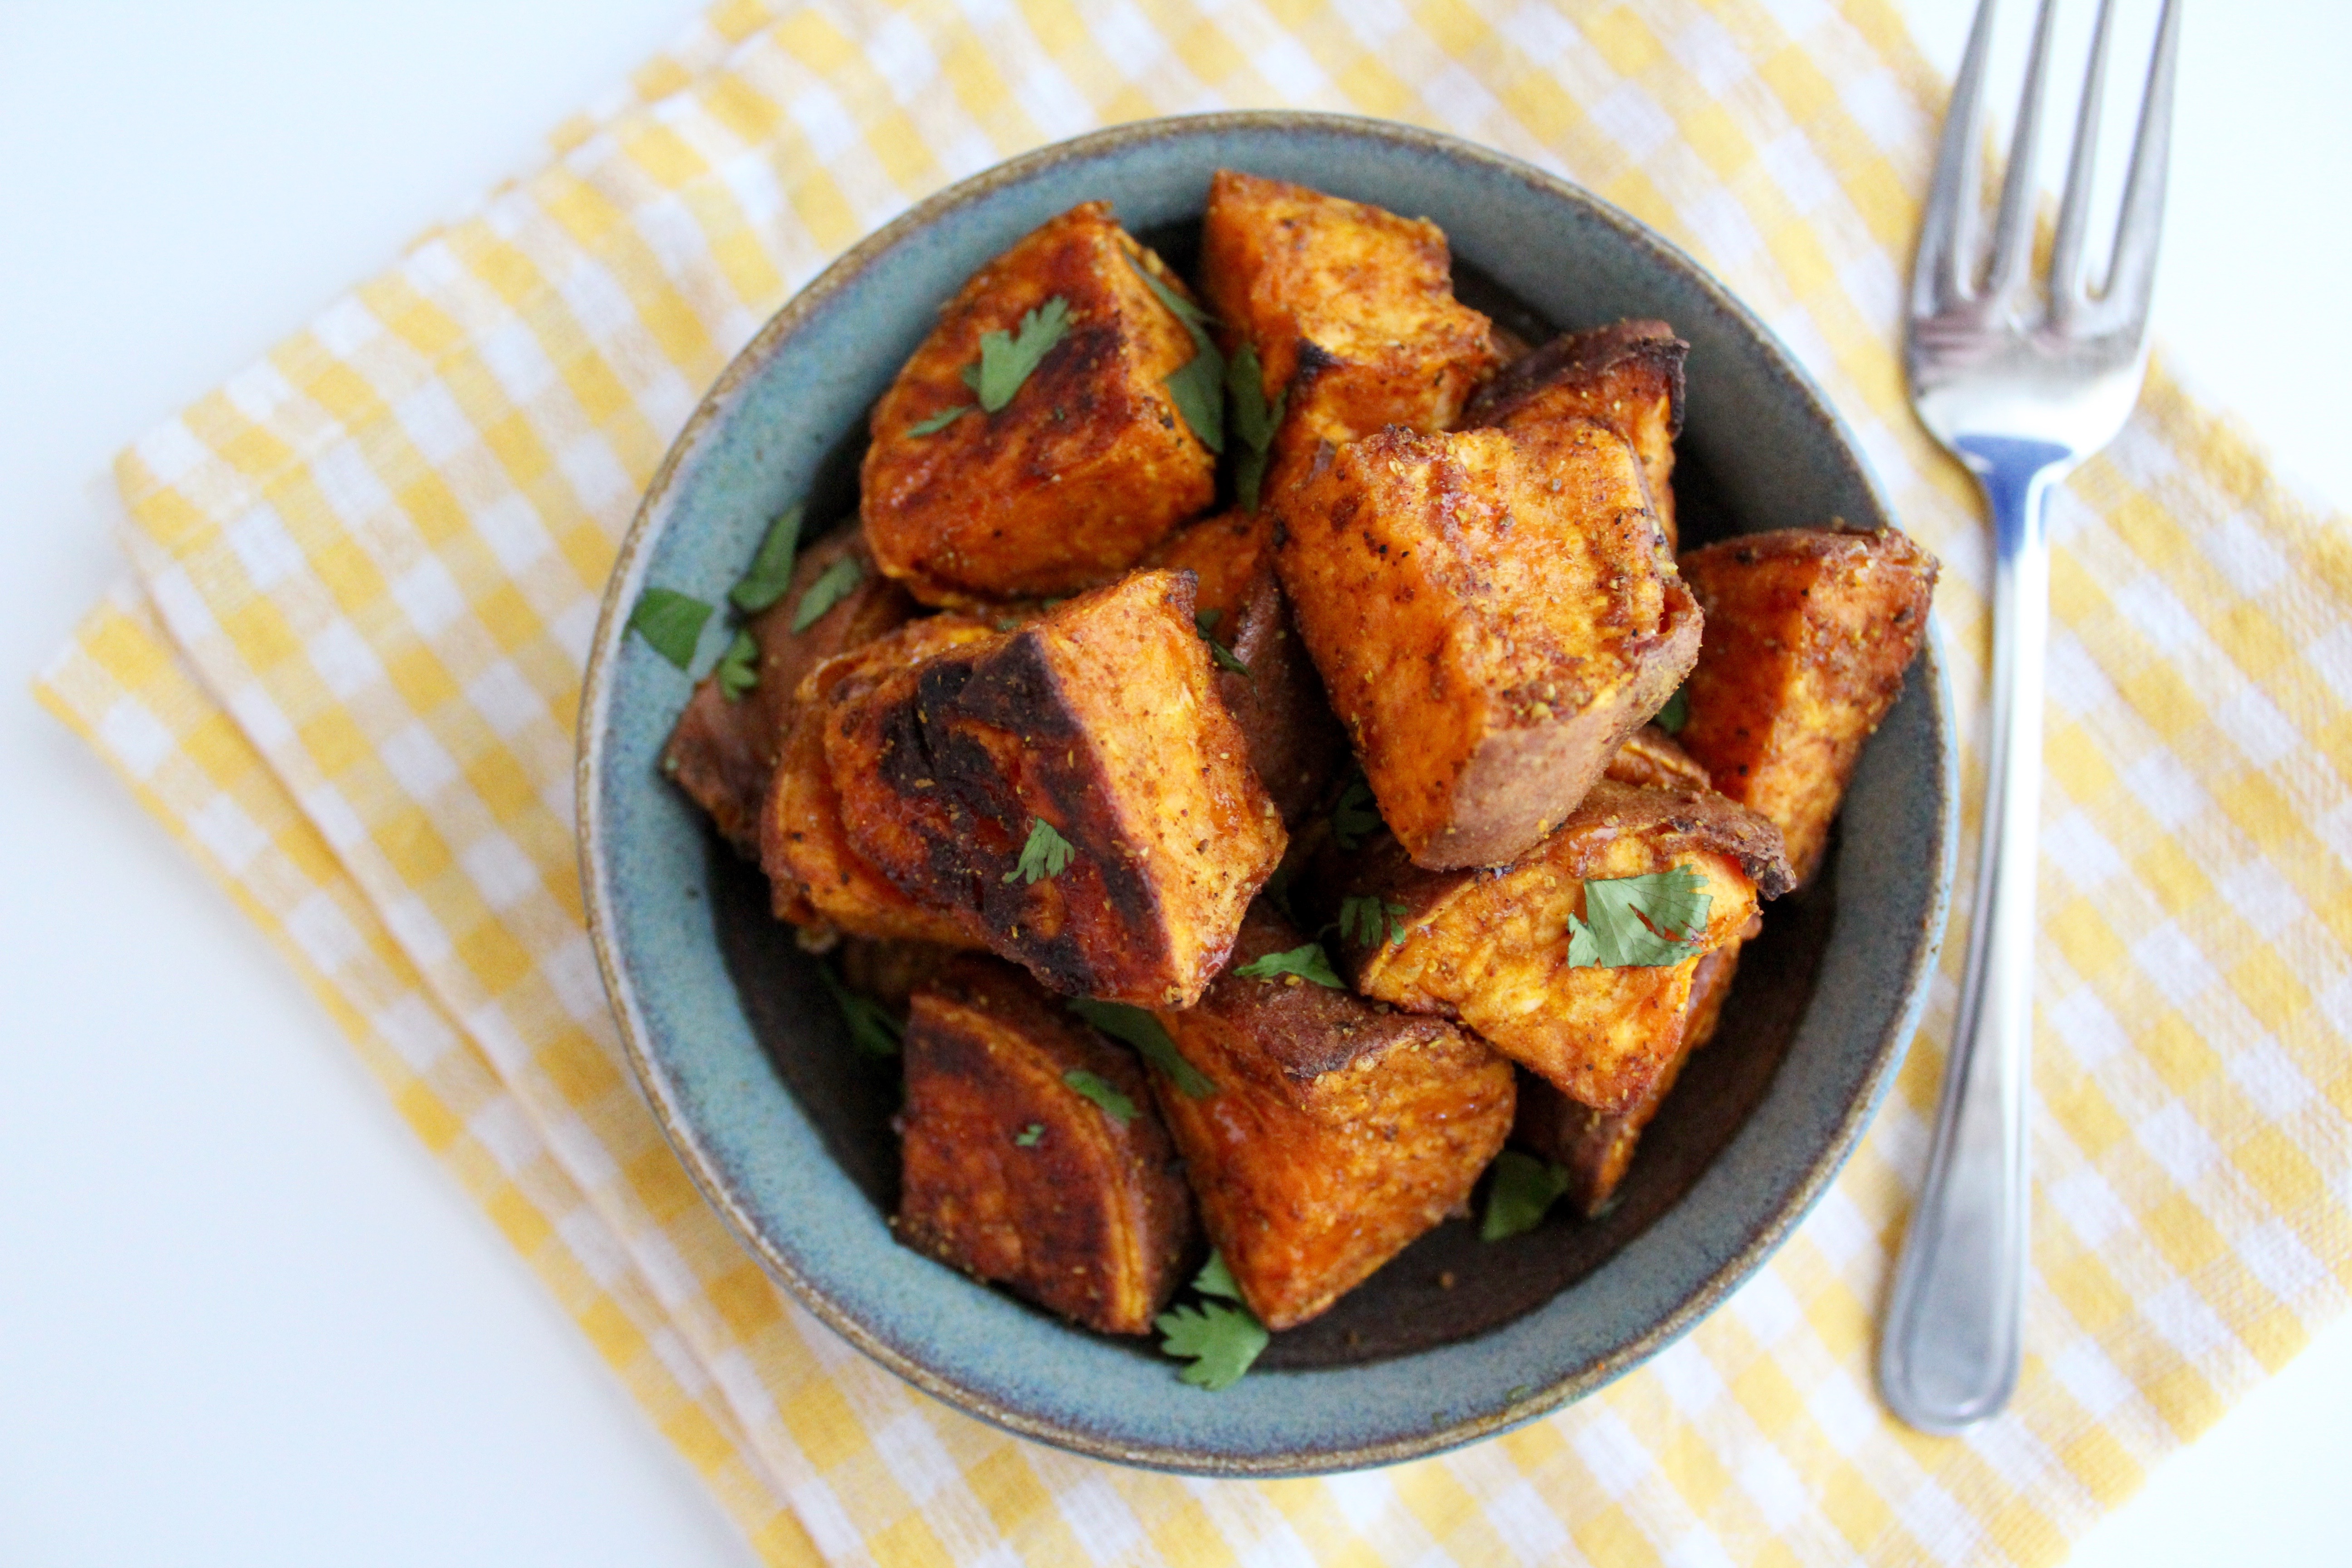 YUM! These Spicy Curry Roasted Sweet Potatoes are unreal!! The best sweet and spicy dish!